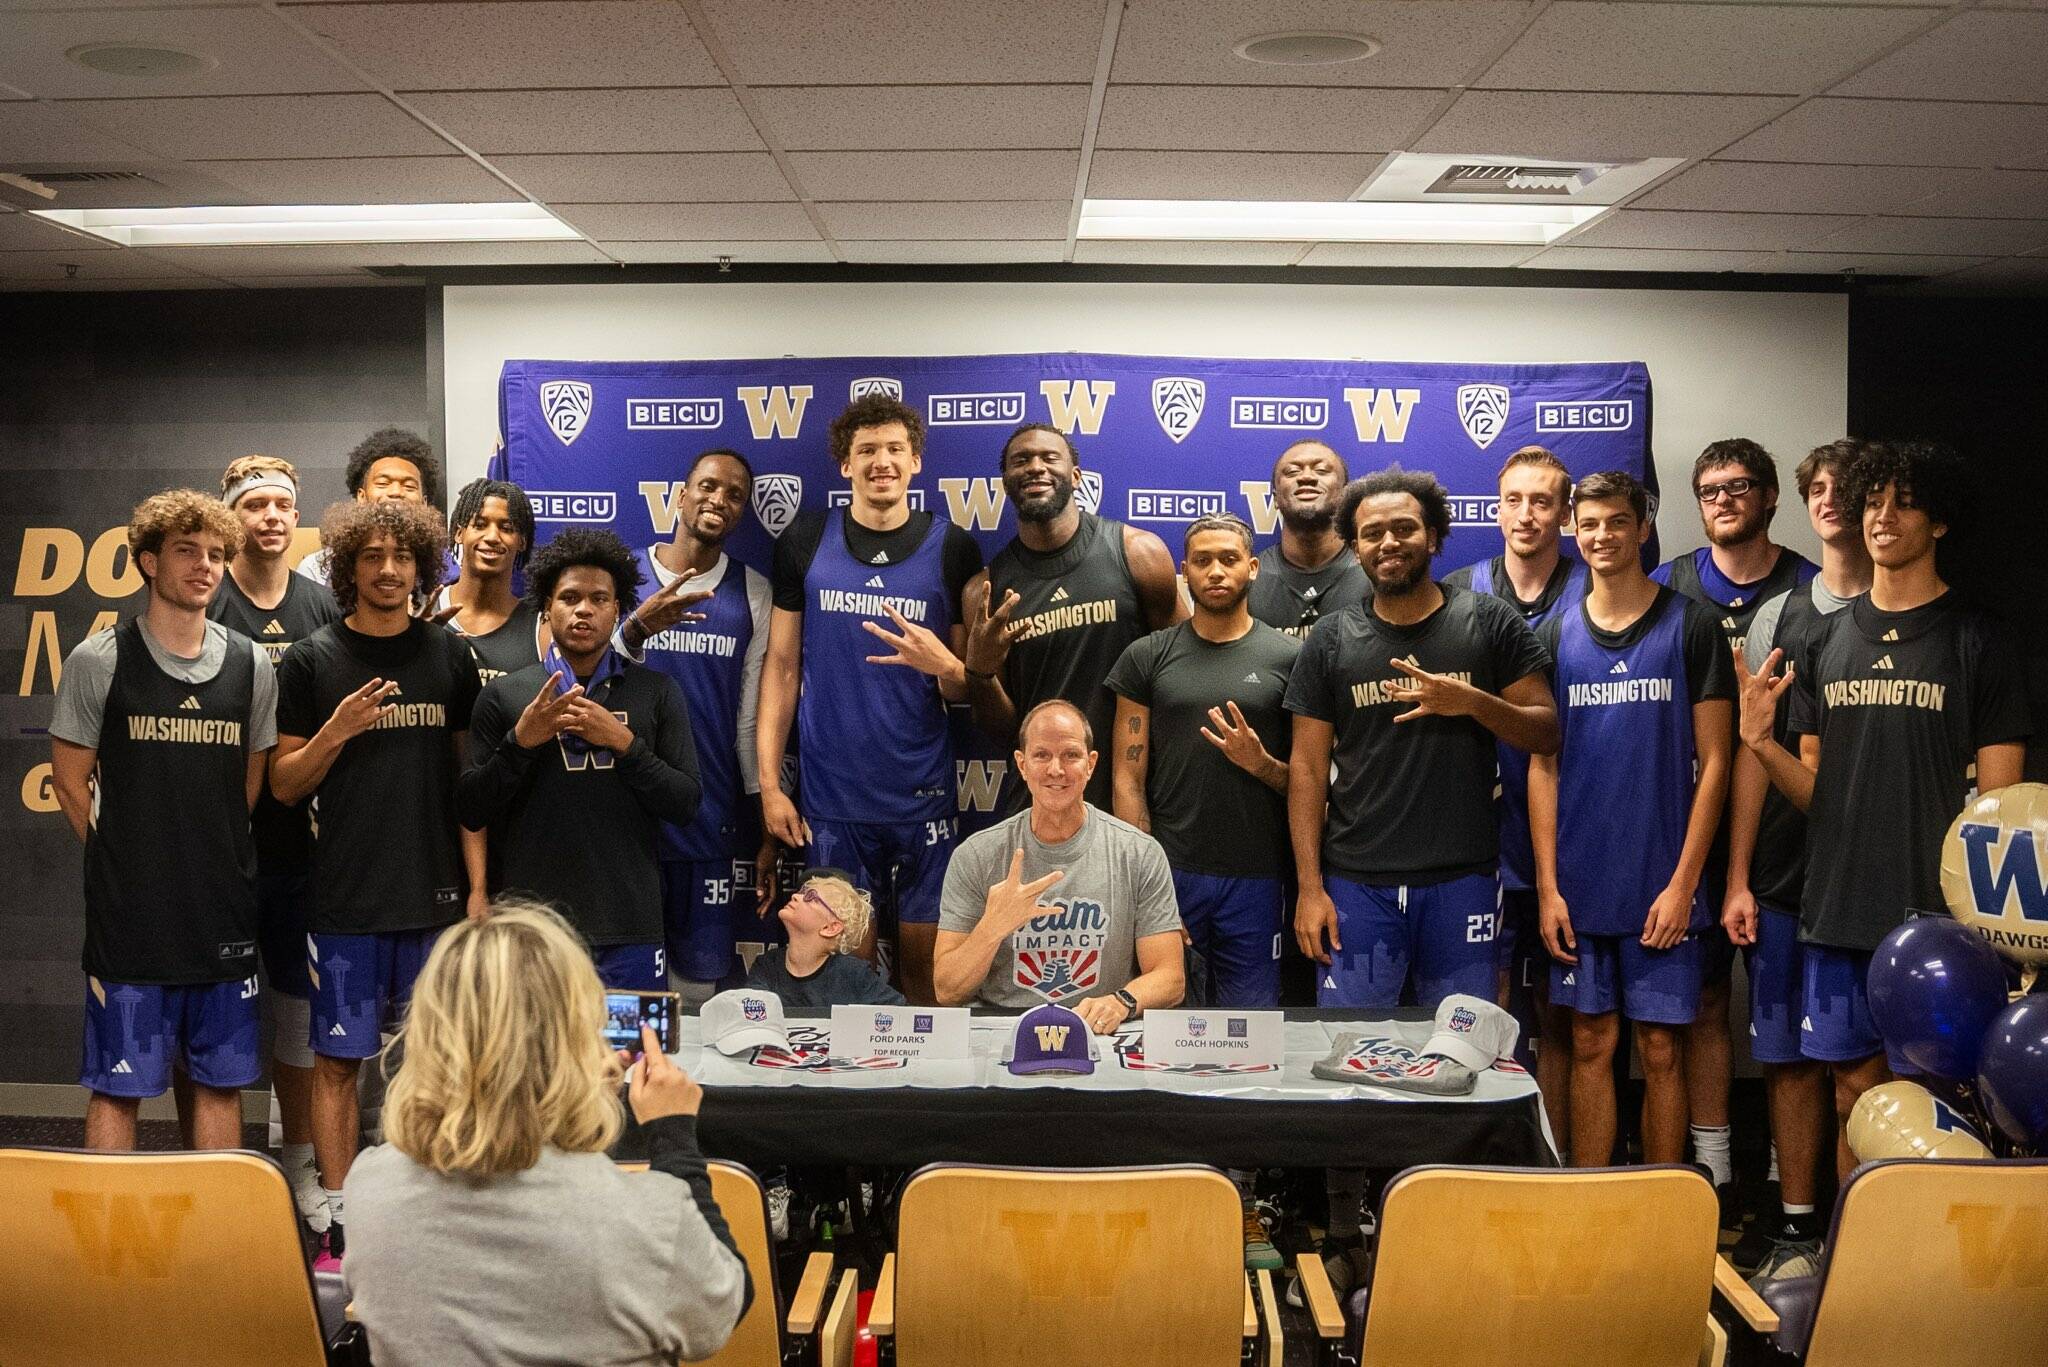 Seven-year-old Ford Parks of Mercer Island poses with the University of Washington men’s basketball team while his mother Effie Parks takes photos. Ford, who is battling a rare genetic disorder, signed with the Huskies through Team IMPACT, a nonprofit organization matching disabled children with college athletic teams across the country. Coach Mike Hopkins described the newest addition to the team as “tough, hardworking and full of joy,” during an emotional ceremony on Oct. 18. Ford will attend team activities, including practices and games, for the next two seasons. He is enrolled at Northwood Elementary School on the Island. Hopkins said: “Our program is built around toughness, grittiness and togetherness. Ford is 7, and he’s already overcome more adversity than most people do their whole lives.” Ford is battling a rare genetic disorder called CTNNB1 Syndrome. Team IMPACT is a Boston-based nonprofit that connects children facing chronic illnesses with college teams. Photo courtesy of UW Athletics